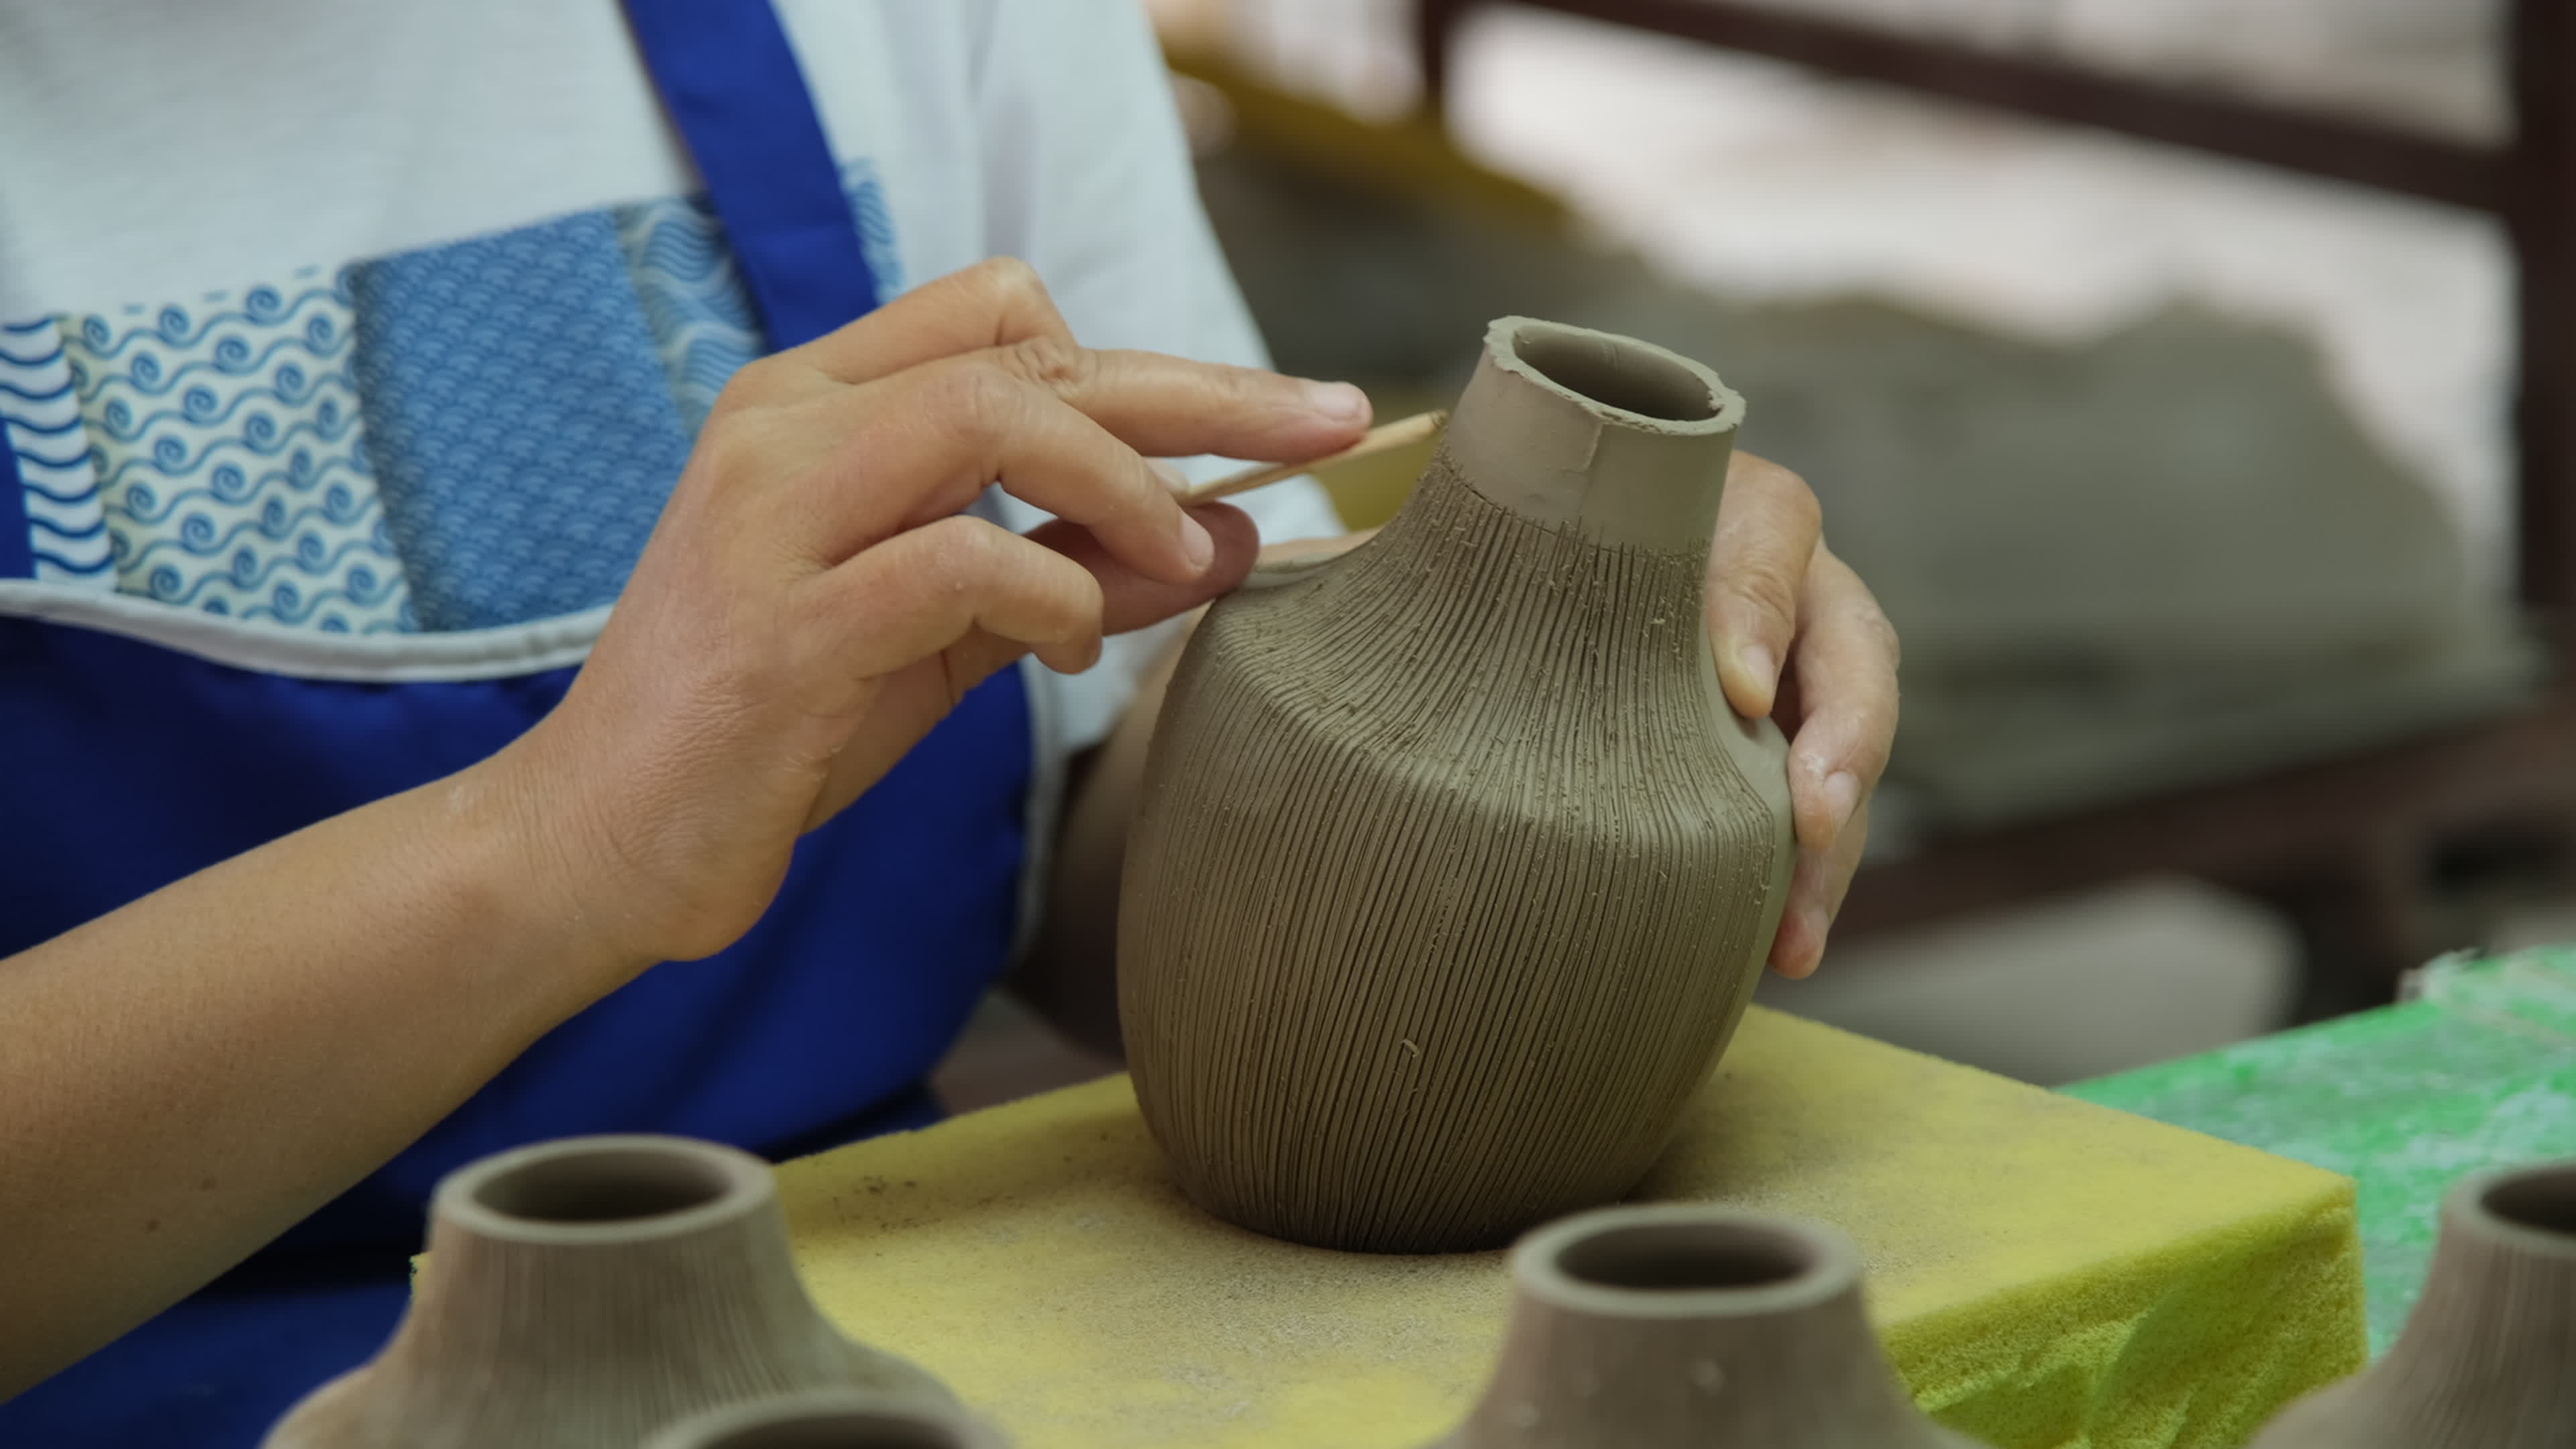 Making of Clay Pottery by Hand